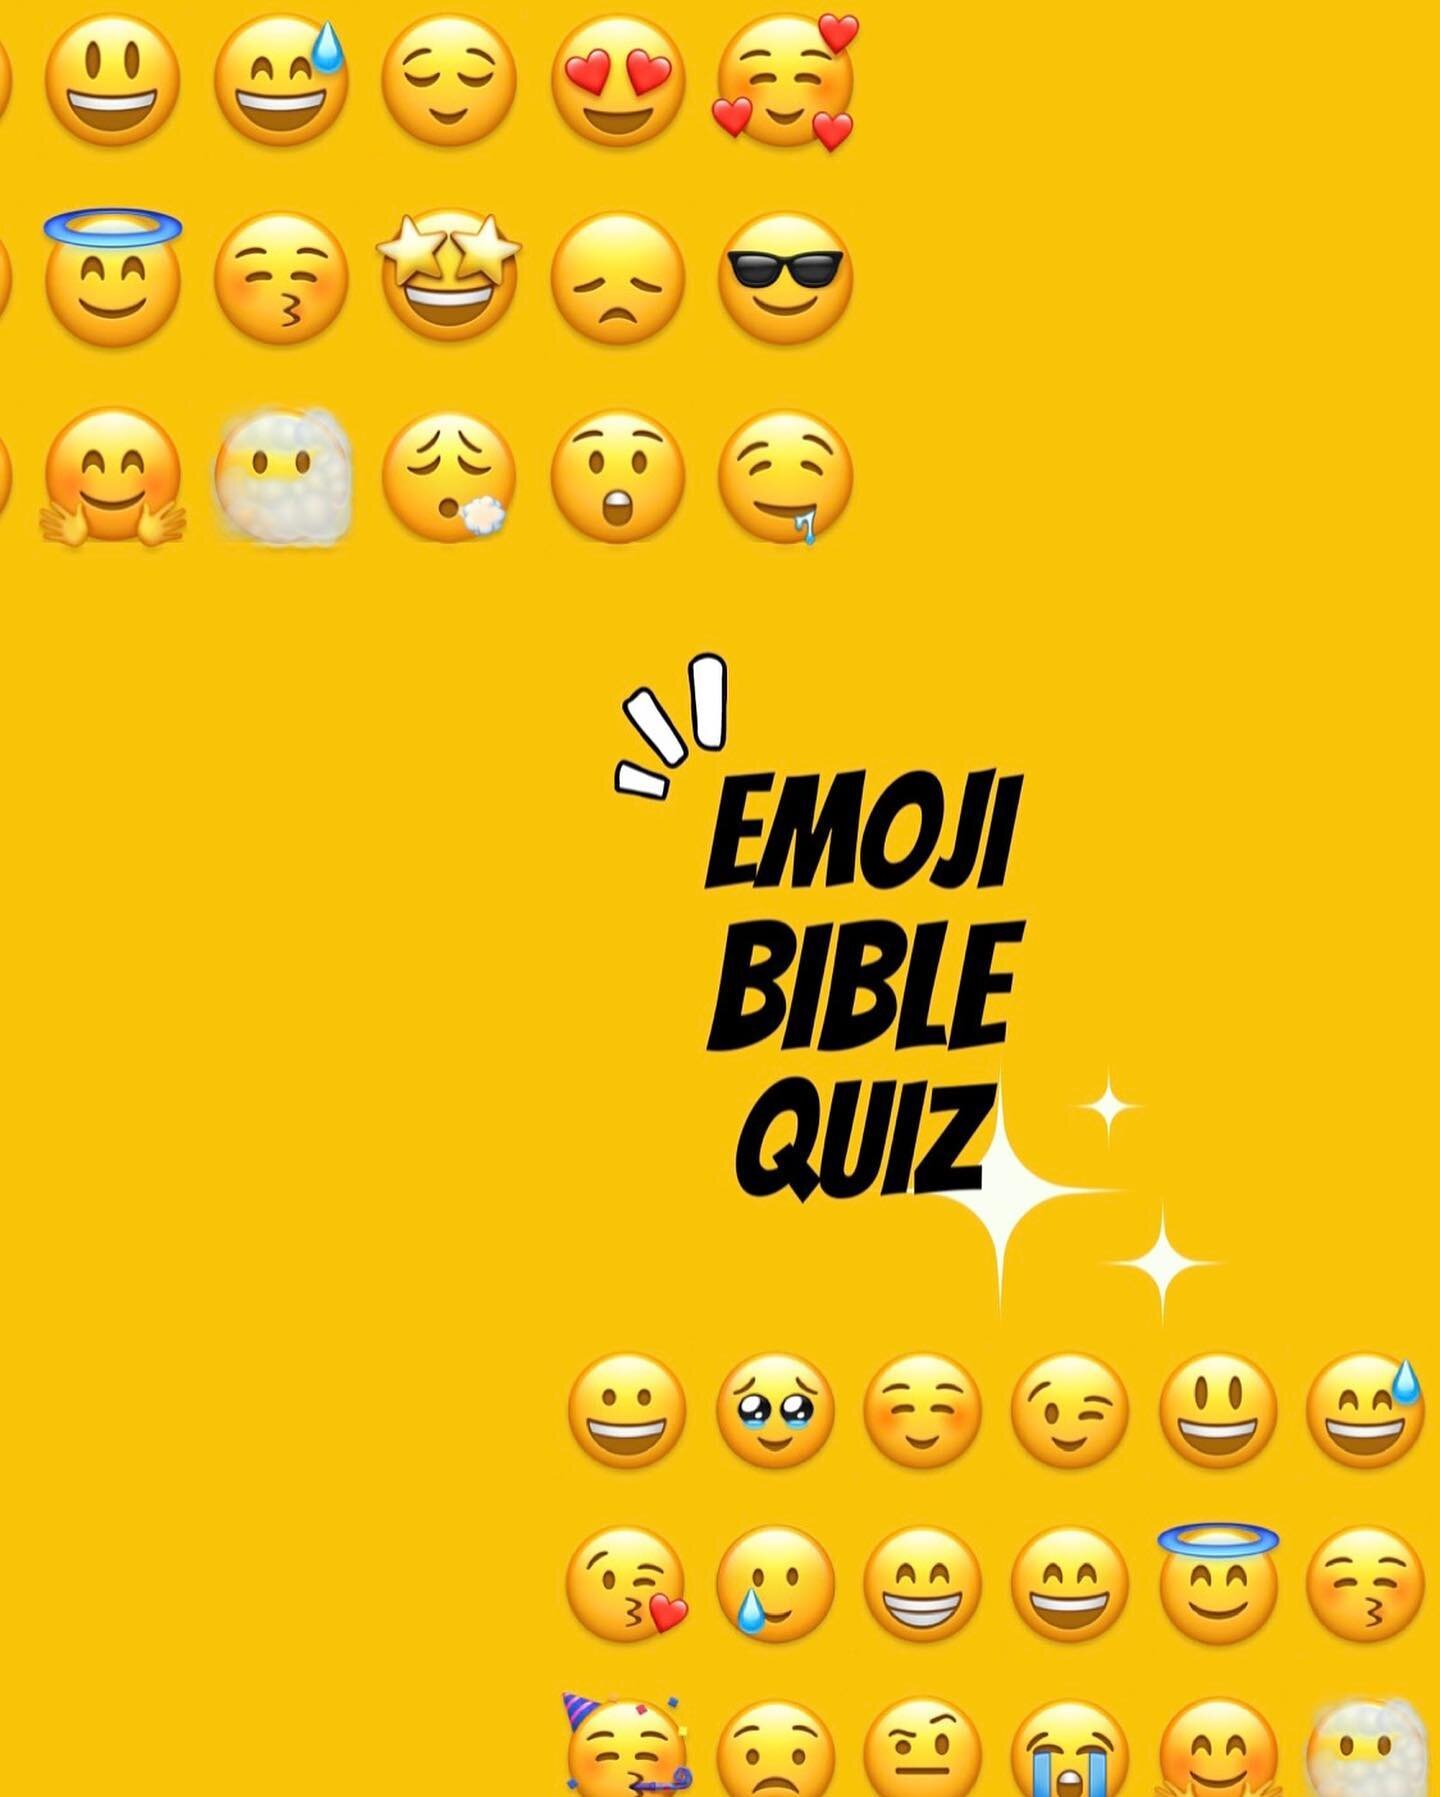 Can you guess all 3 Bible Stories? We made the pretty easy this time around. Be on the lookout for harder ones next time 🧐😇😁

#biblestories #biblefun #bibleemojiquiz